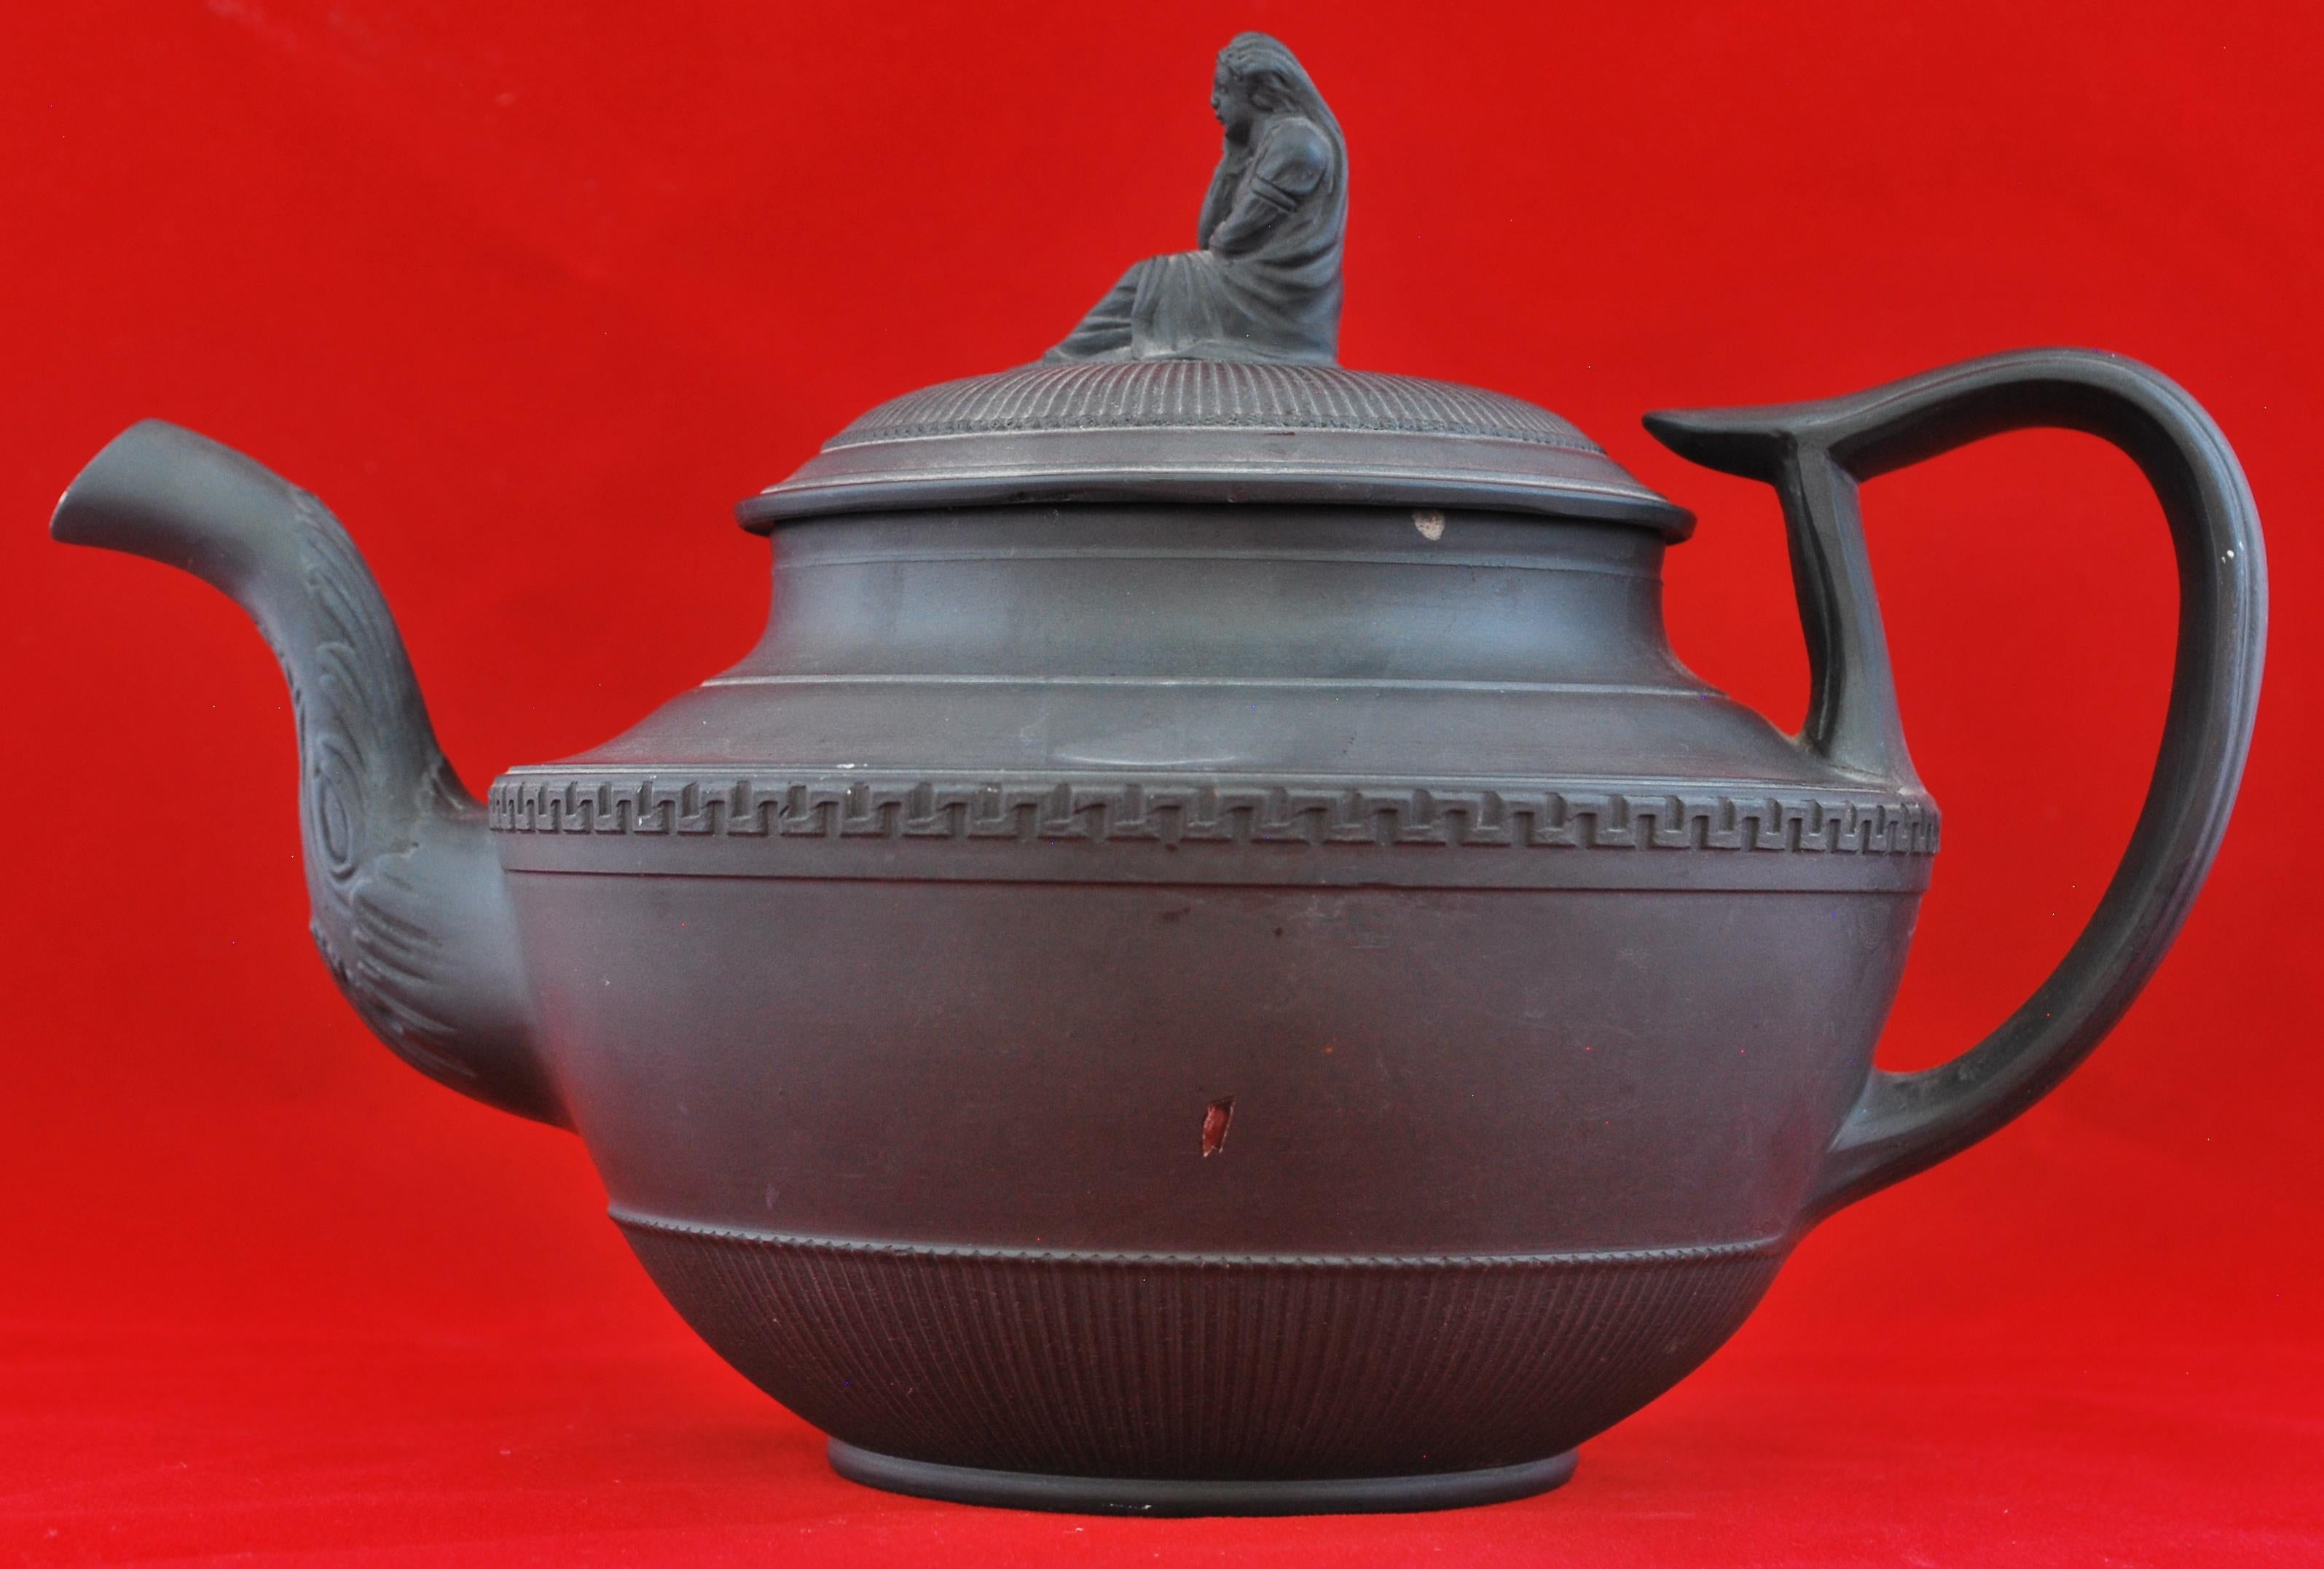 A fine teapot with D-shape handle and a peculiar finial in the form of a widow without her barrel & cruze. 

The finial confirms the Turner attribution.